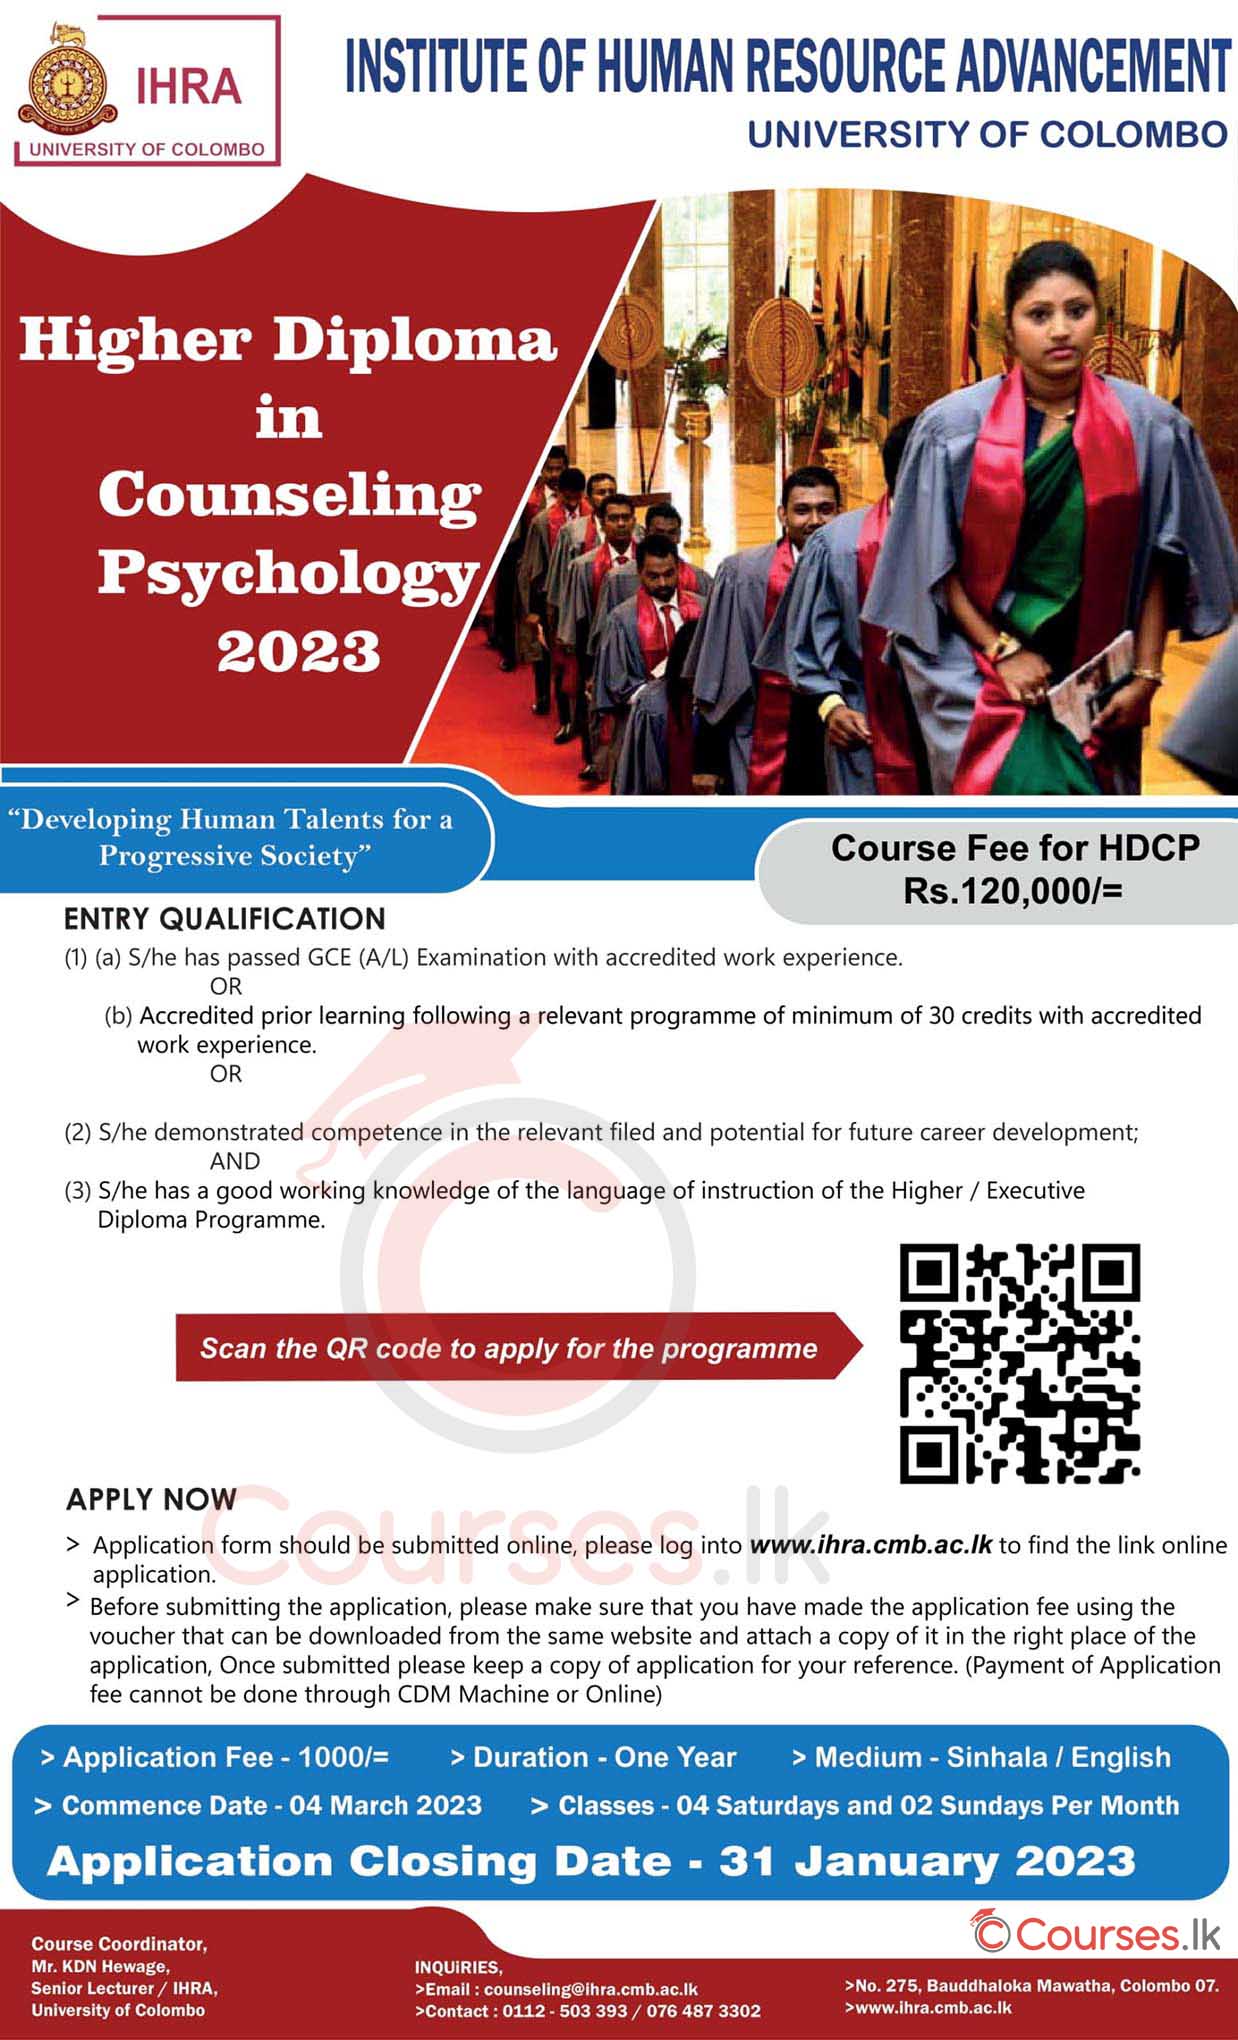 Higher Diploma in Counselling Psychology (2023) - University of Colombo